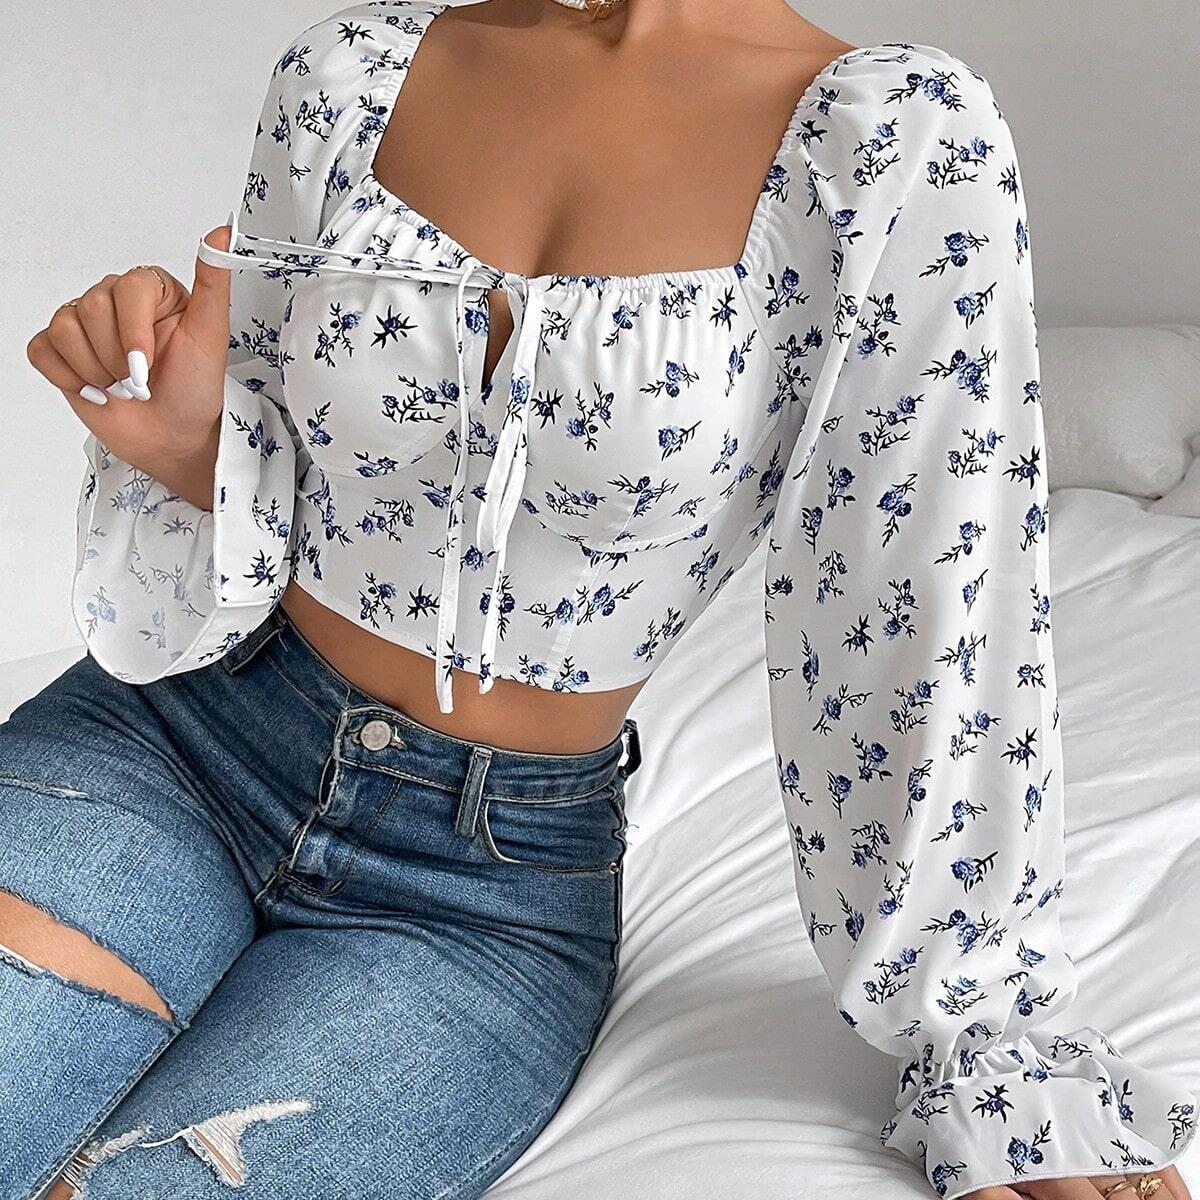 Sexy Square Neckline Short Top Shirts for Women-Shirts & Tops-The Same as picture-S-Free Shipping Leatheretro